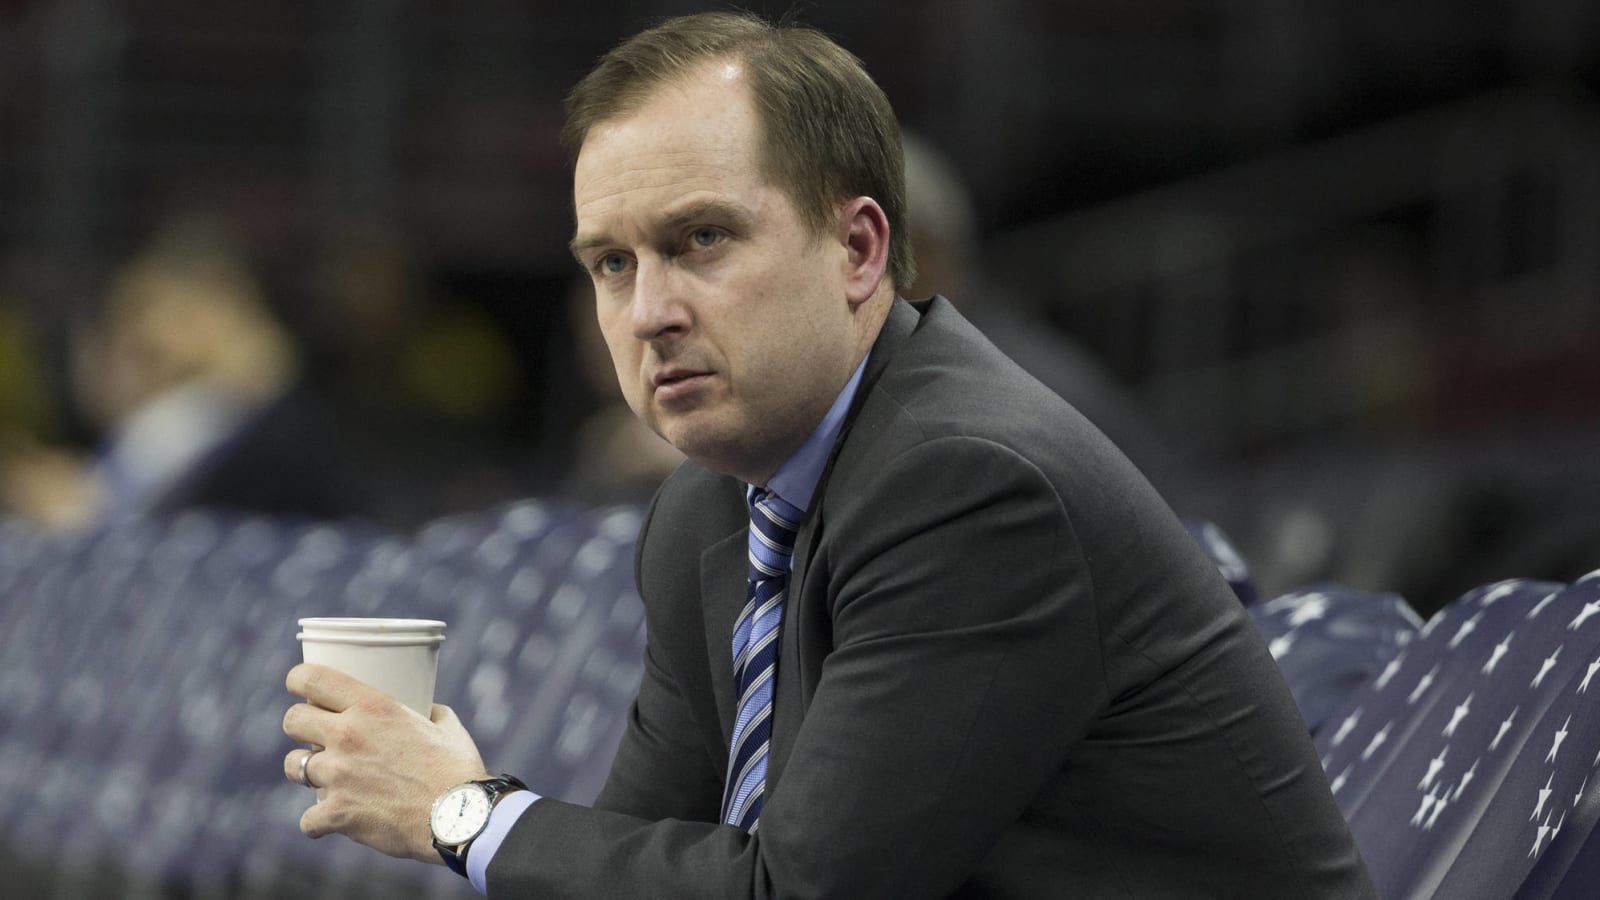 Trust the process: Sam Hinkie raises $50 million for Silicon Valley venture capital firm